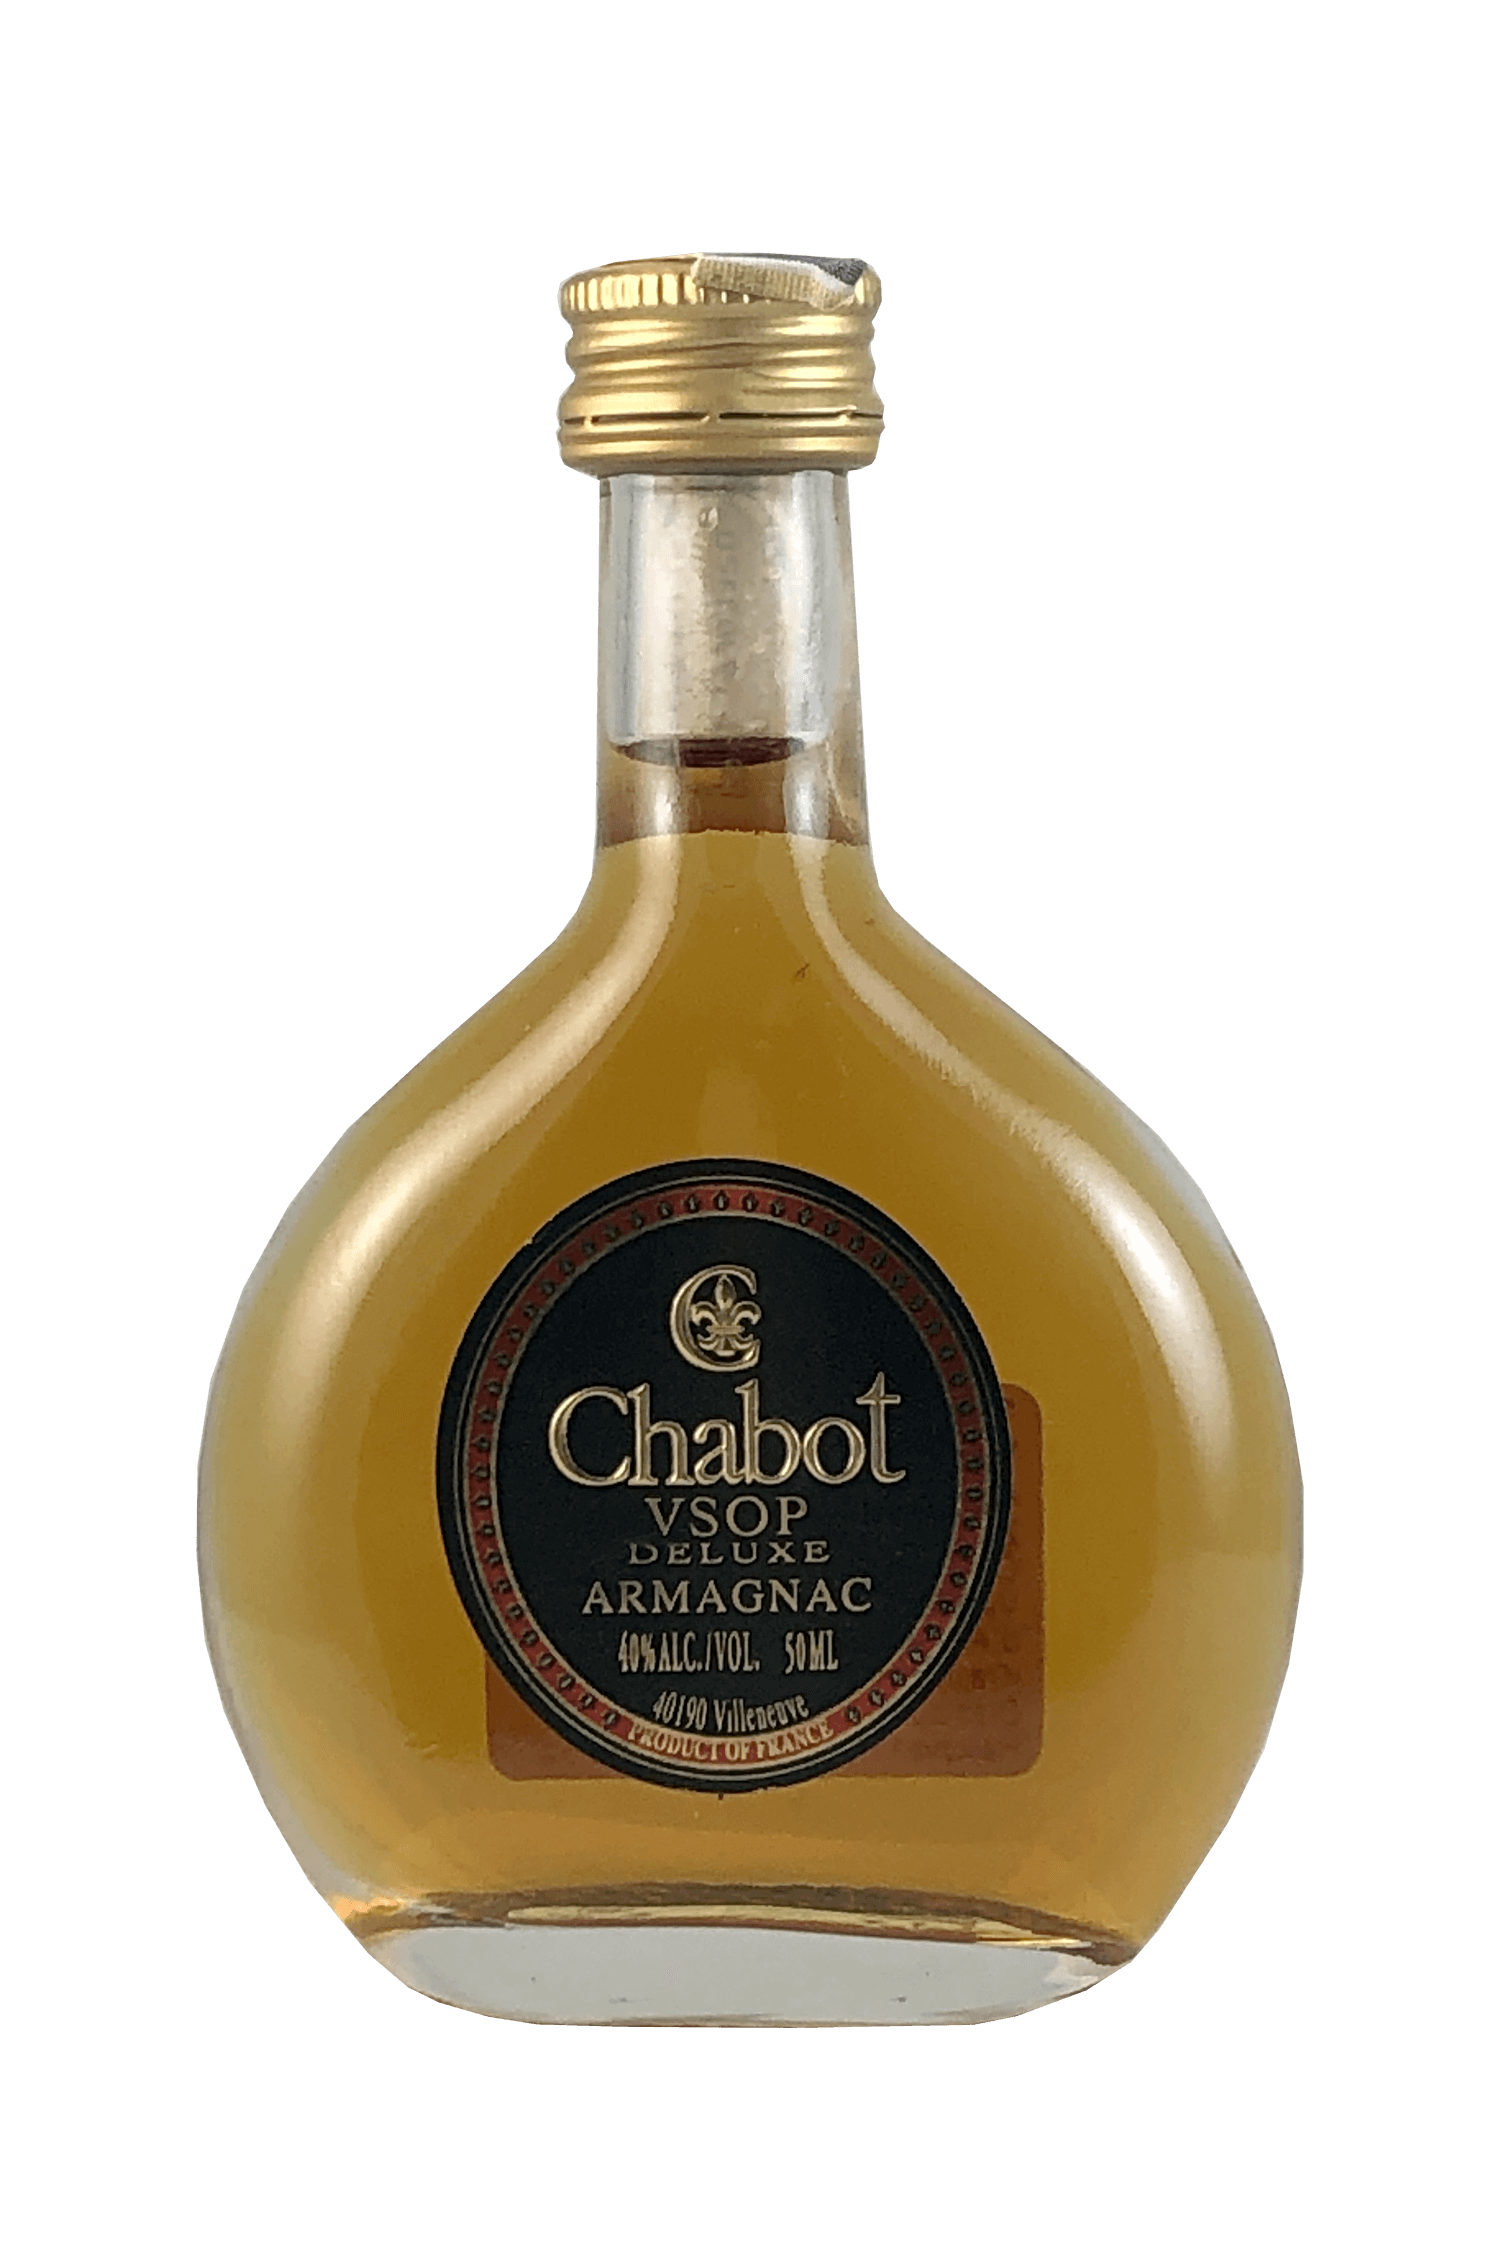 CHABOT VSOP deLUXE